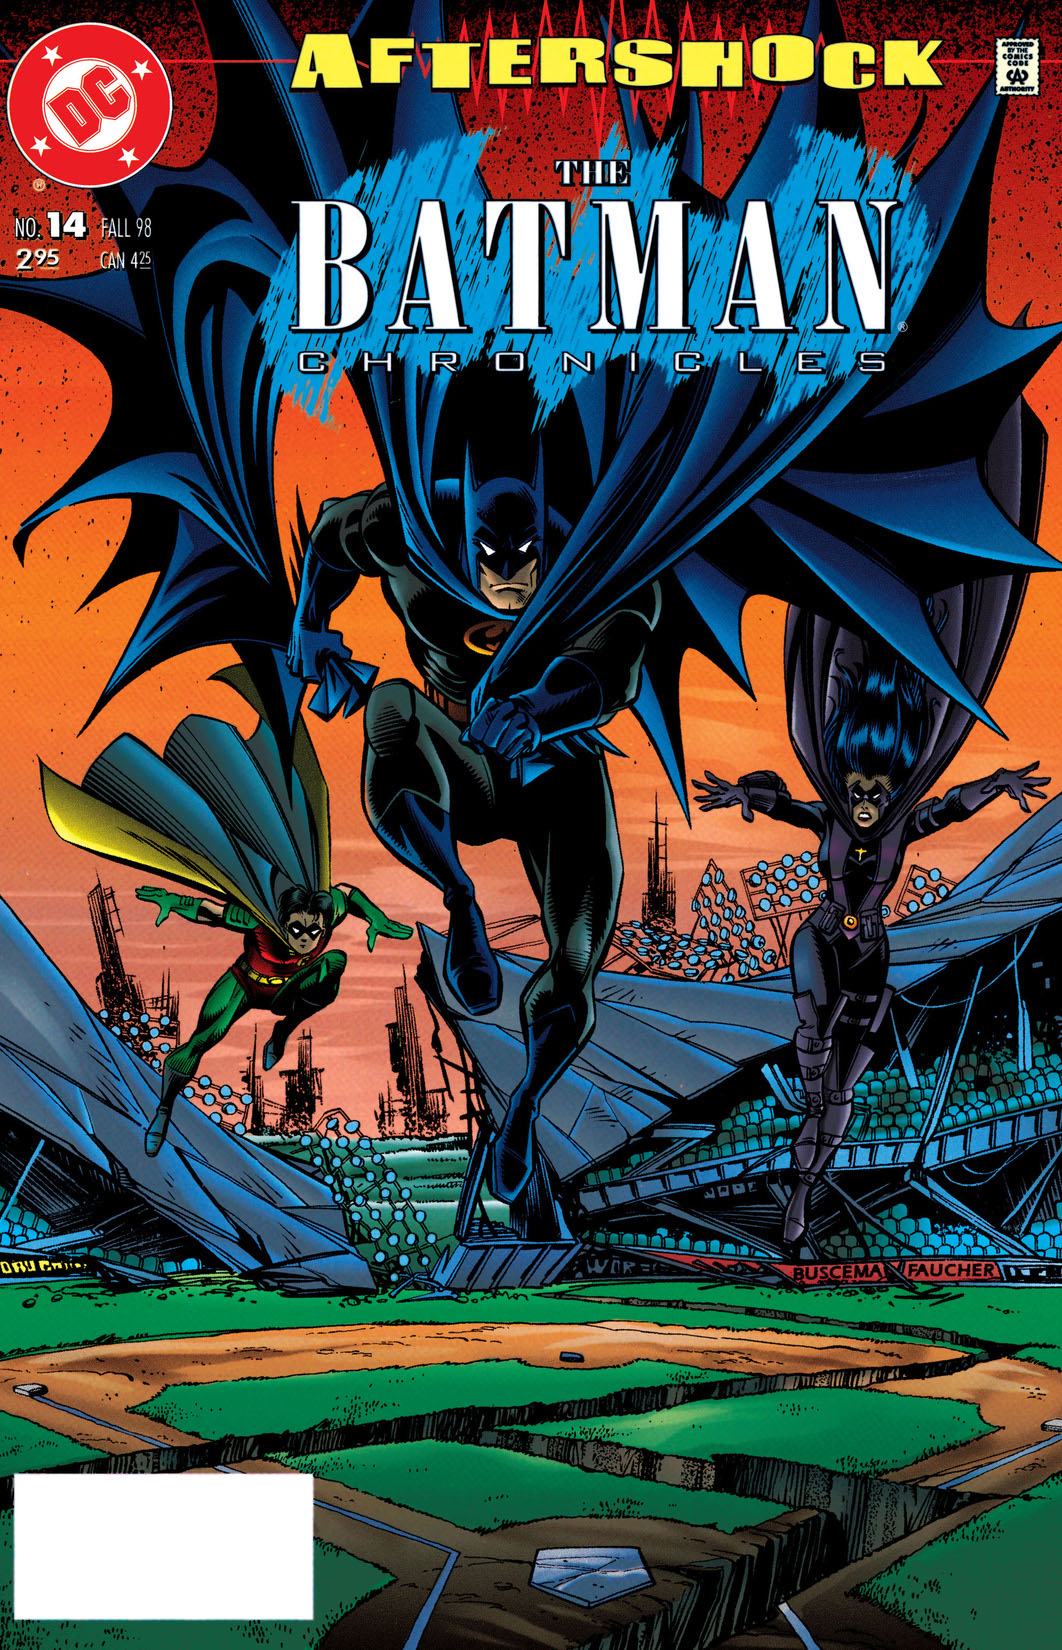 The Batman Chronicles #14 preview images